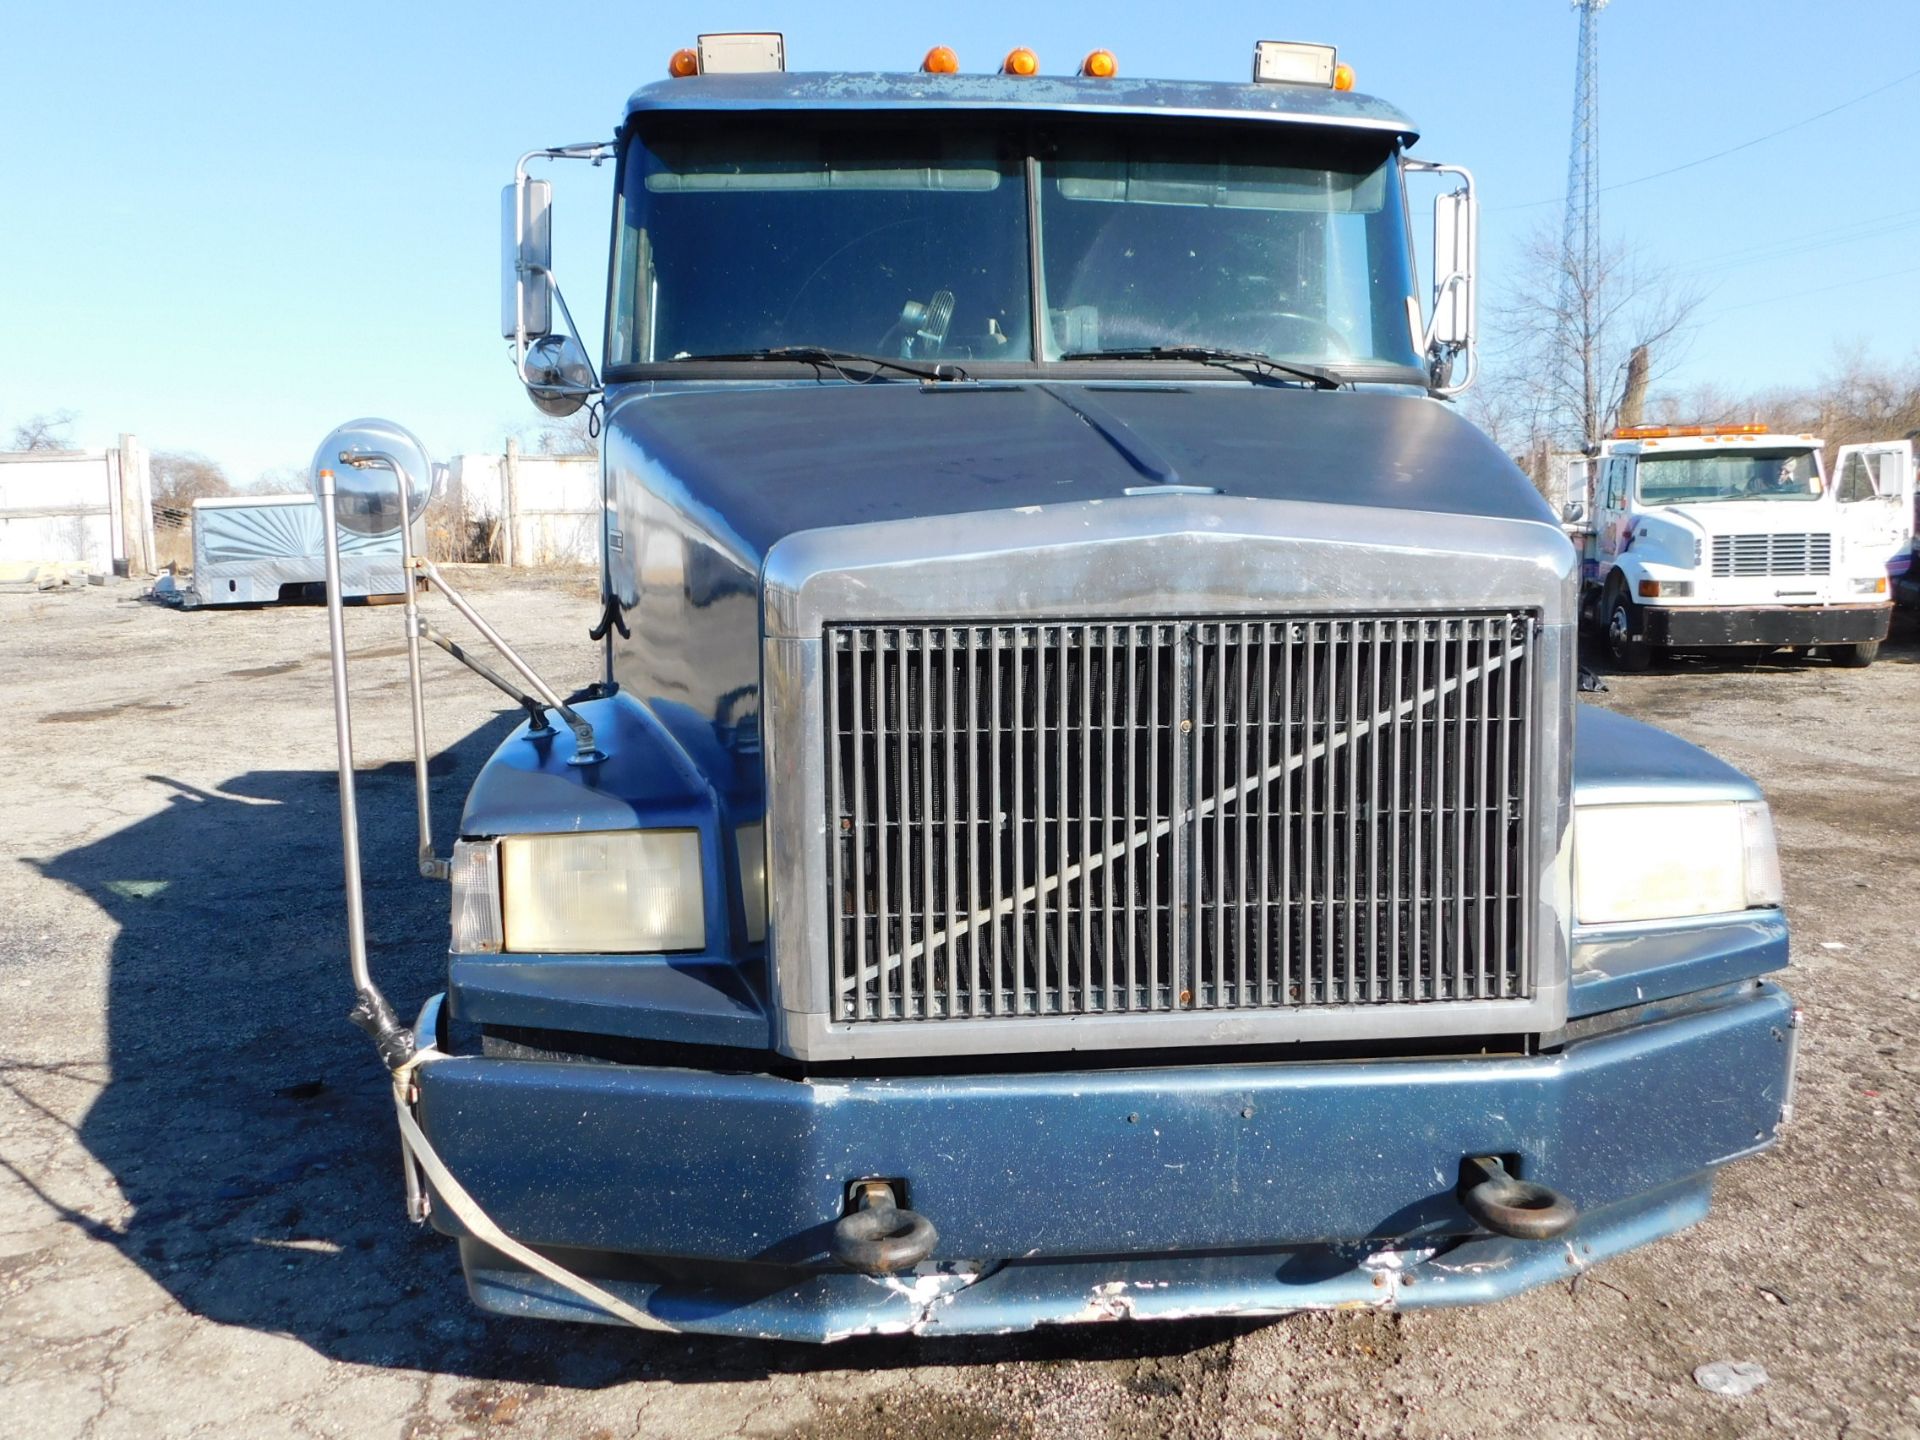 1989 WHITE Volvo GMC Aero Series 60 Heavy Duty Tow Truck, 329,000 miles showing on Odometer, Detroit - Image 2 of 28